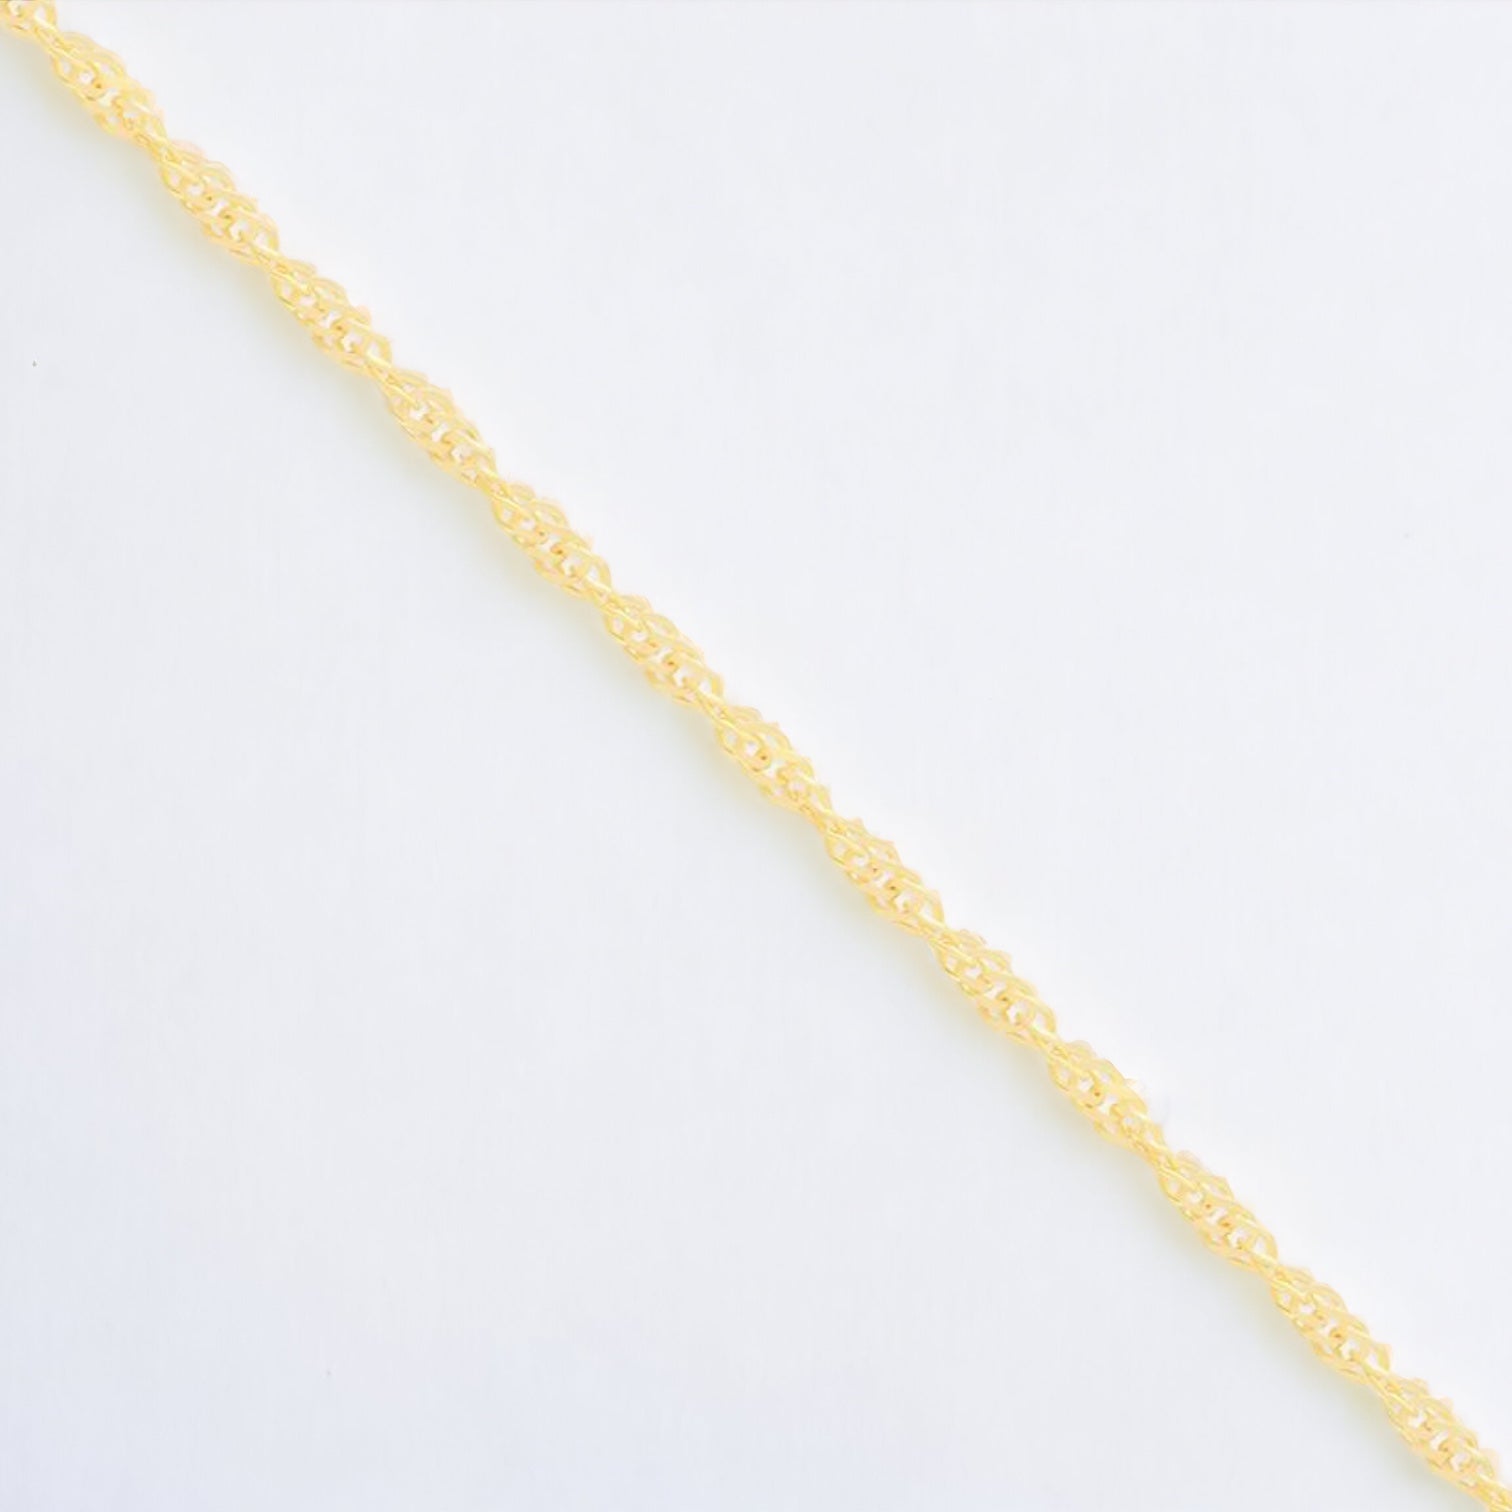 2.2mm 9ct solid Gold Singapore Chain | 16" - 20"